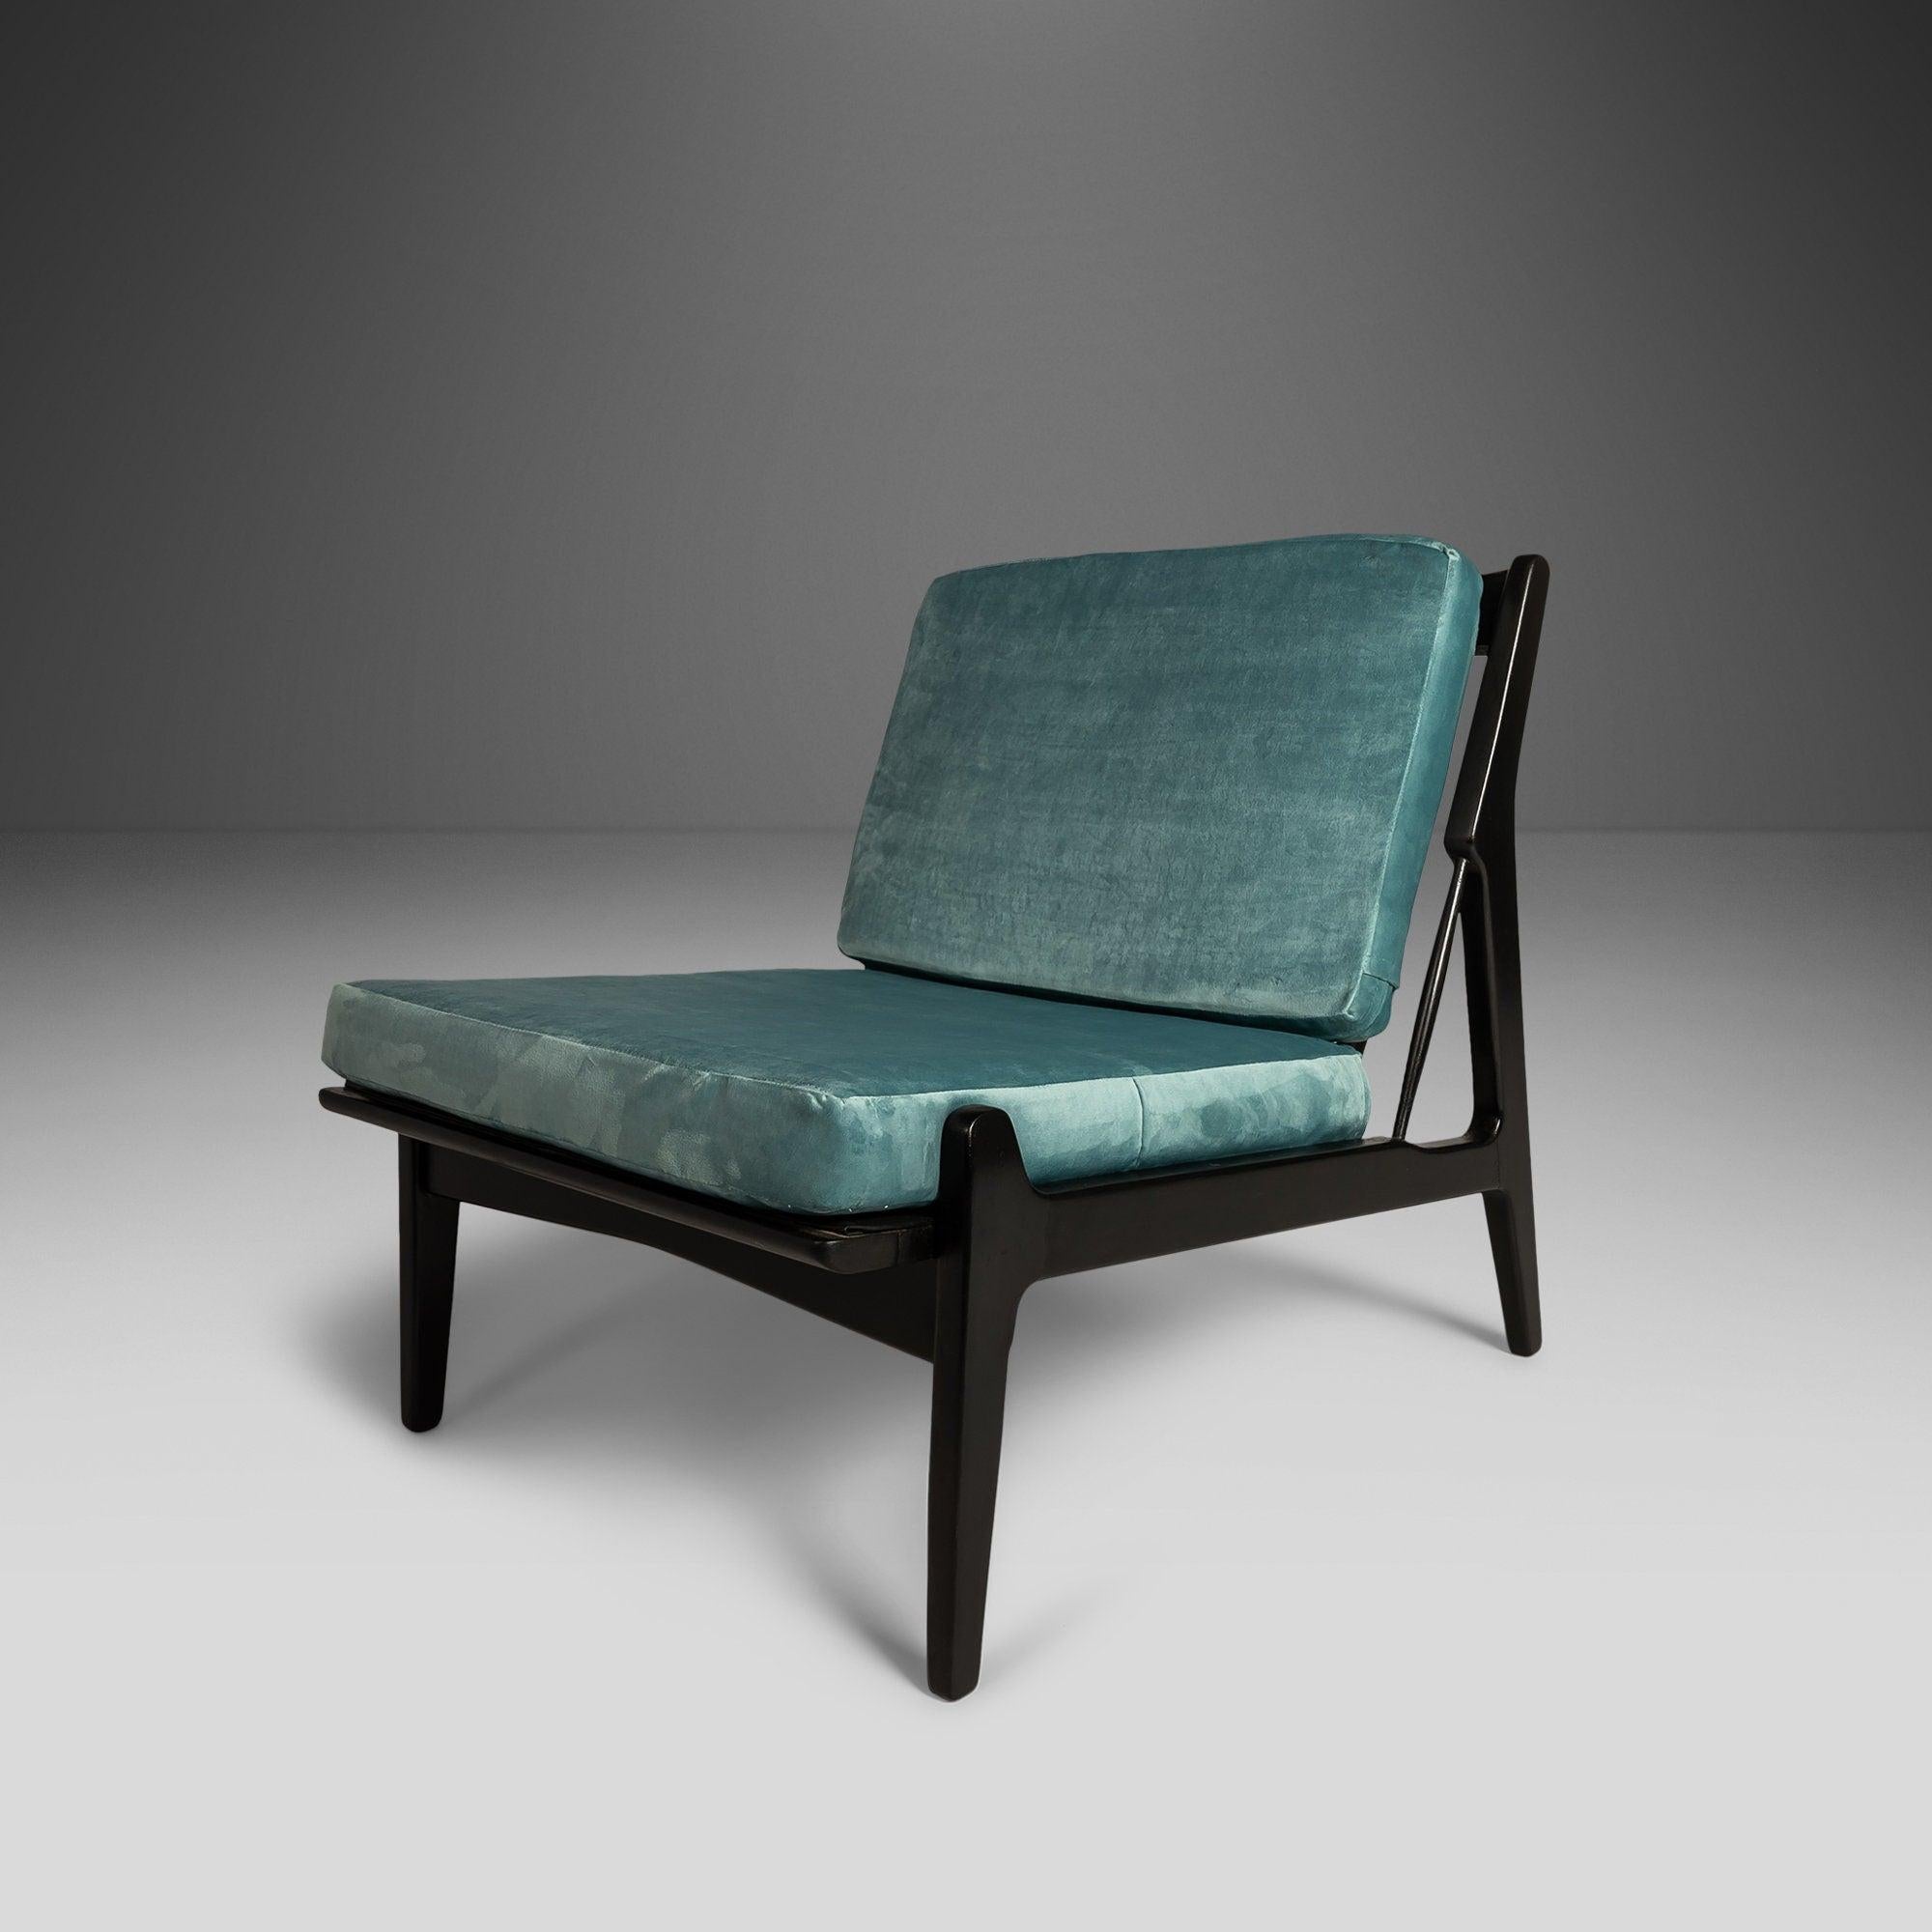 Set of Two '2' Rare Lounge Chairs by Ib Kofod Larsen for Selig, Denmark, C. 1950 For Sale 3